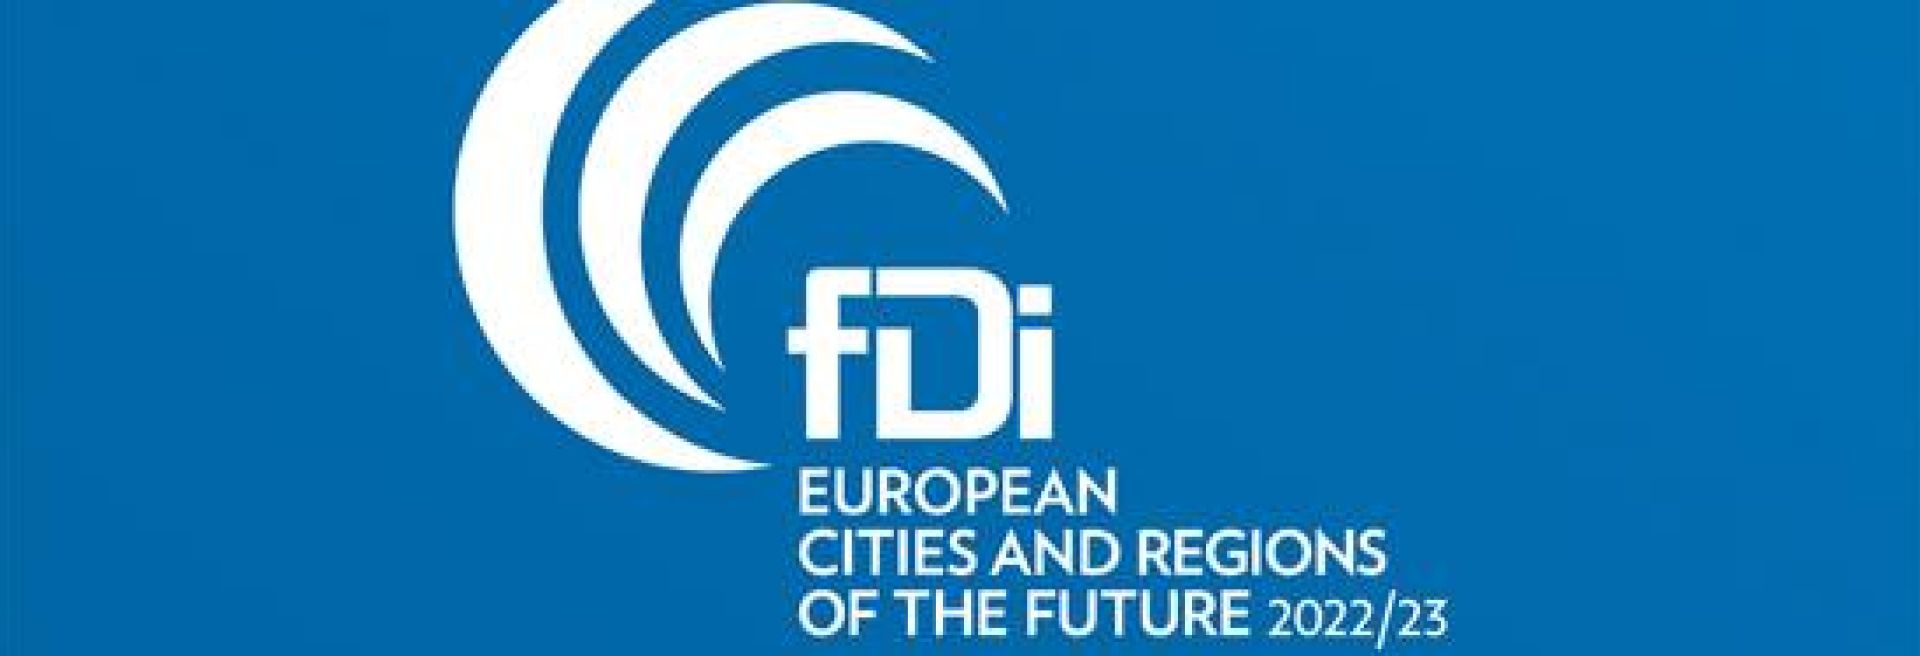 Hungary Recognized Multiple Times at European Cities and Regions of the Future Awards